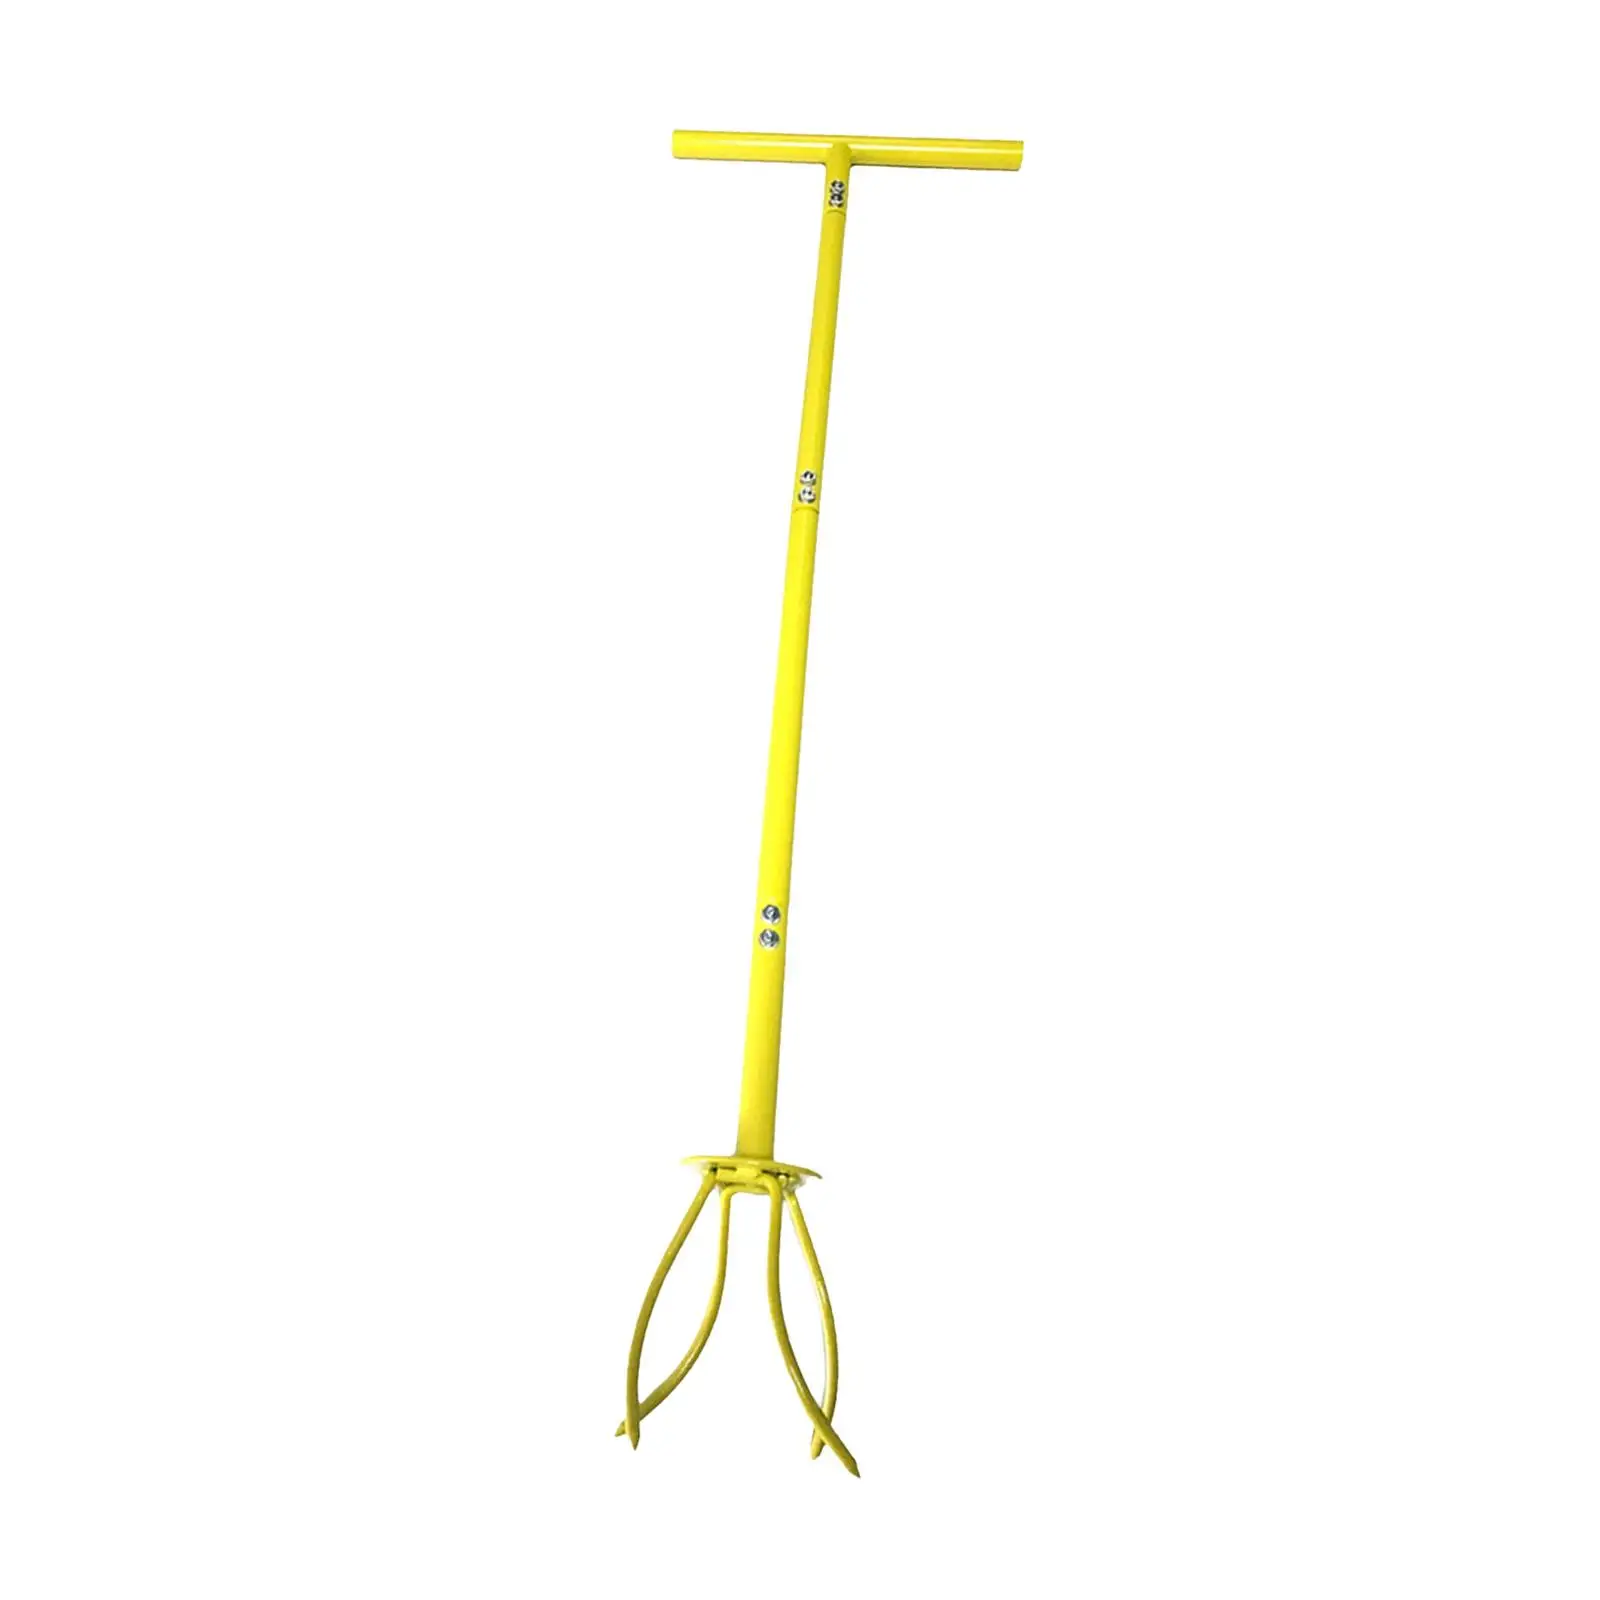 Manual Hand Tiller Heavy Duty No Bending Rust Resistant with A Removable Big Claw with Adjustable Shaft Twist Tiller